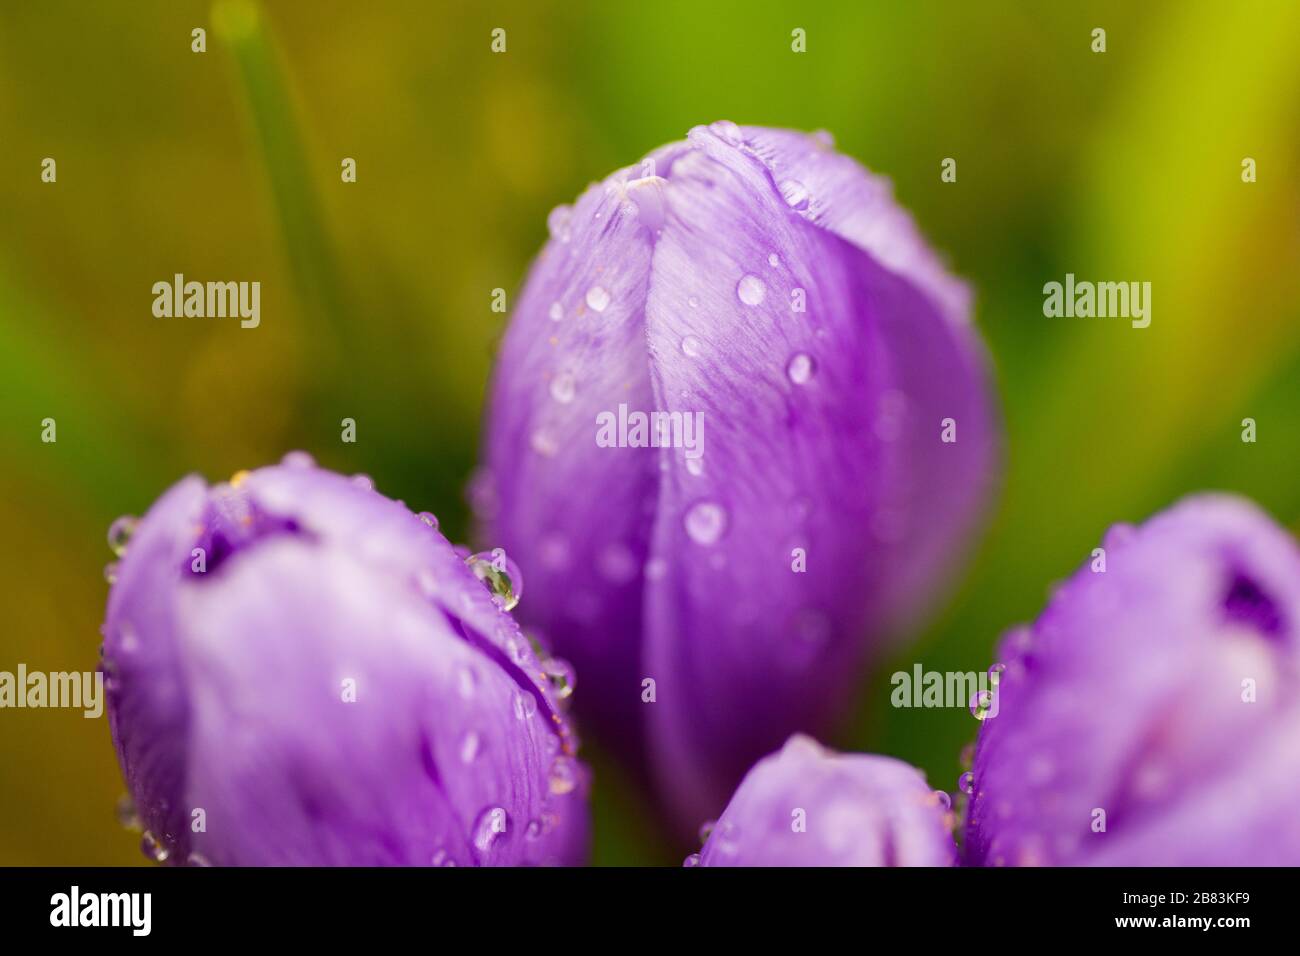 Detail of crocus flowers with blurred background. Narrow depth of field. Stock Photo